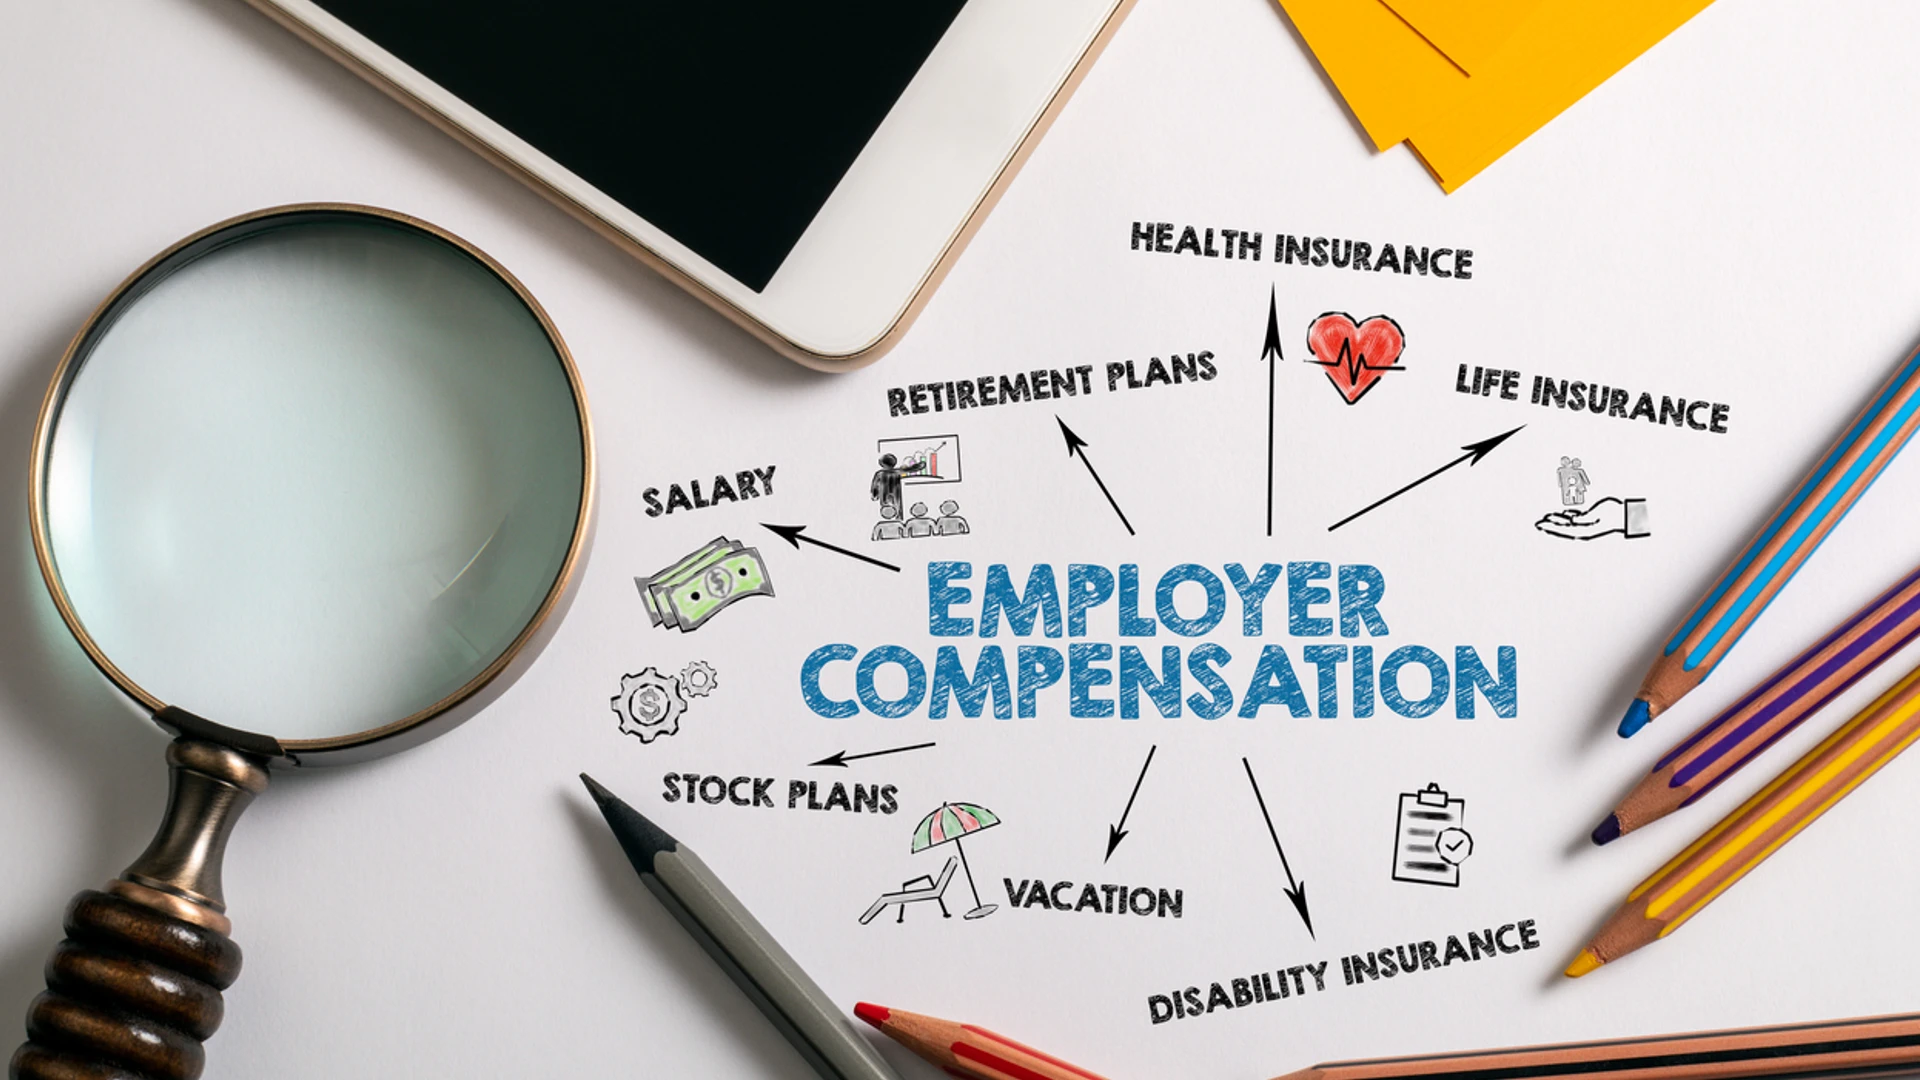 Your Compensation Strategy: What to Consider for a Well-Balanced Approach